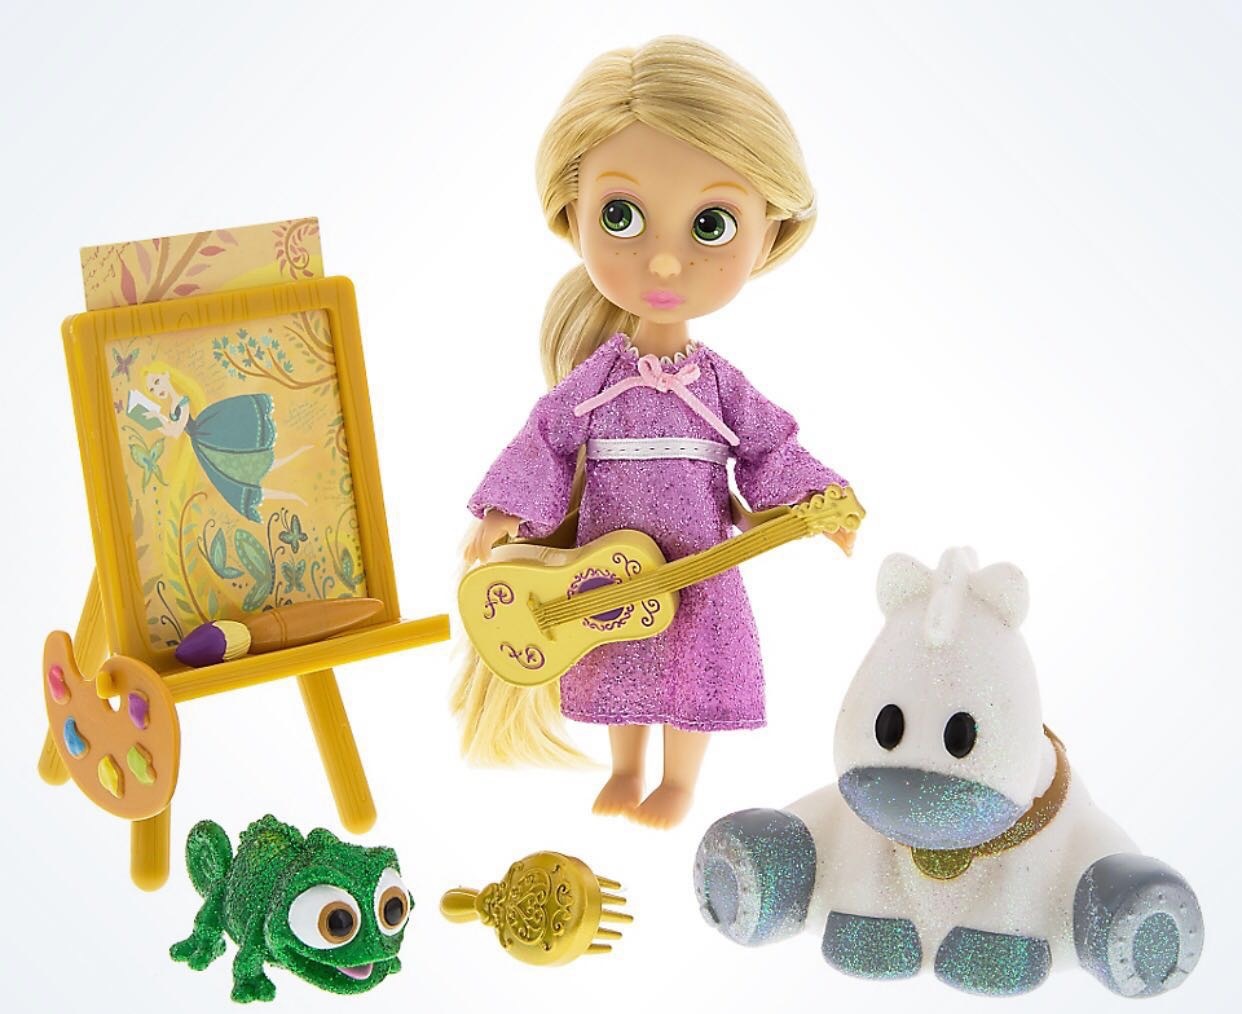 Disney Animators' Collection Rapunzel & Friends Mini Doll Play Set New with Case